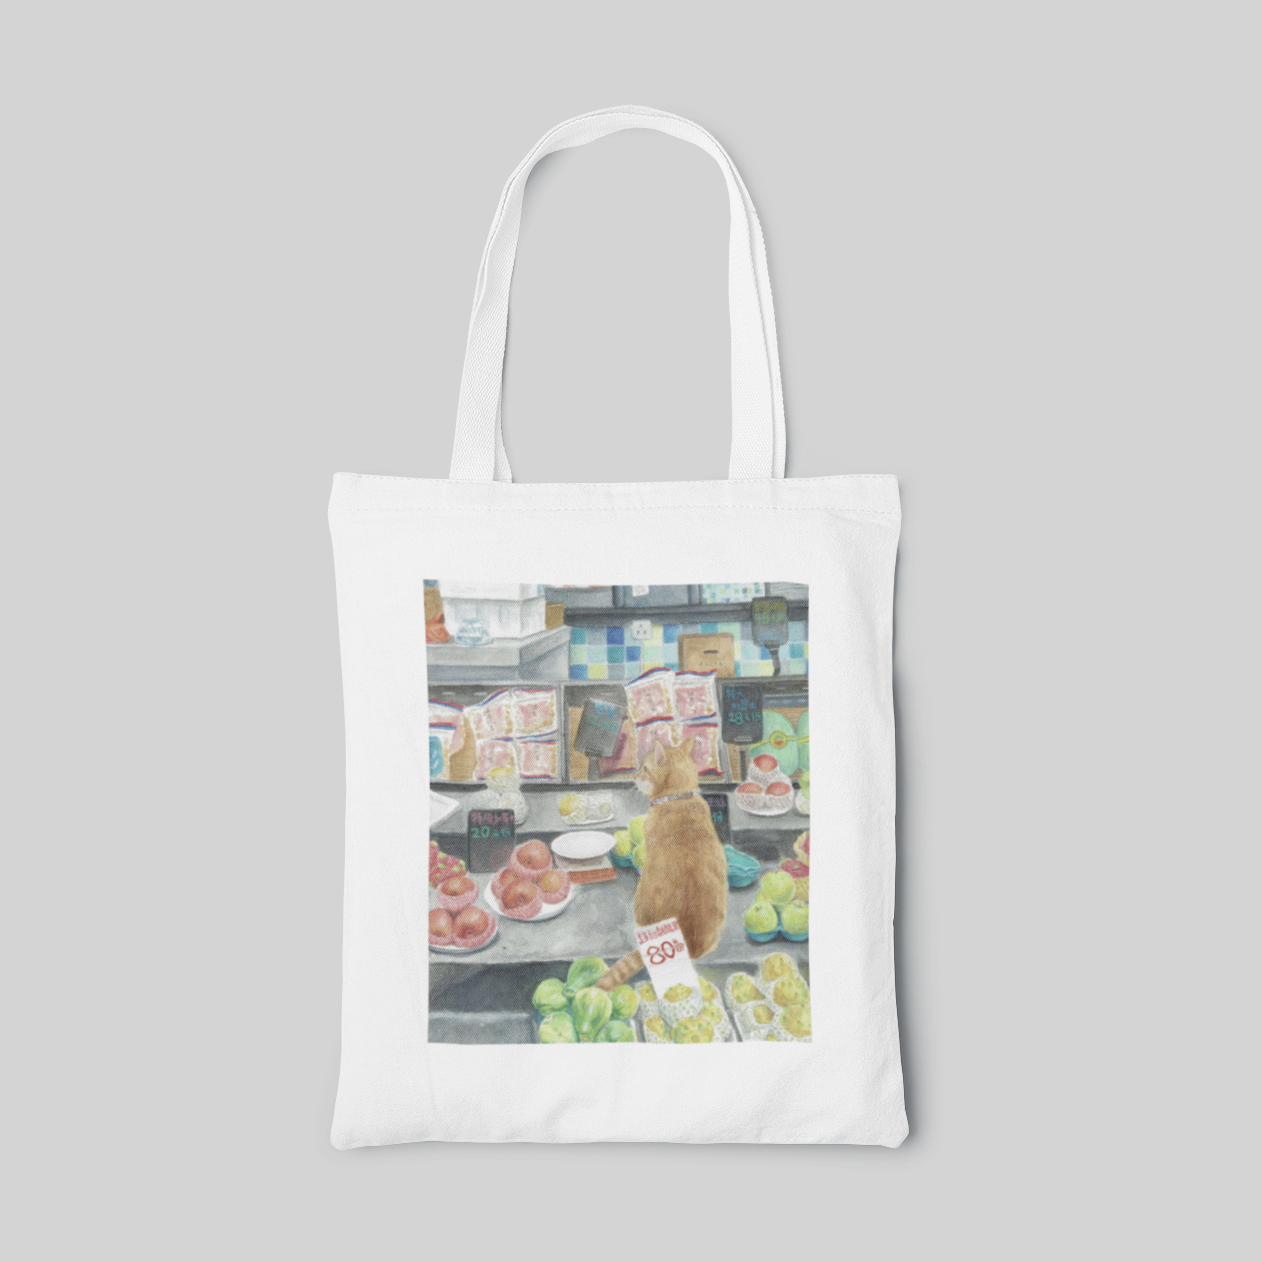 urban designed white tote bag with yellow cat managing the fruit store in wet market, front side